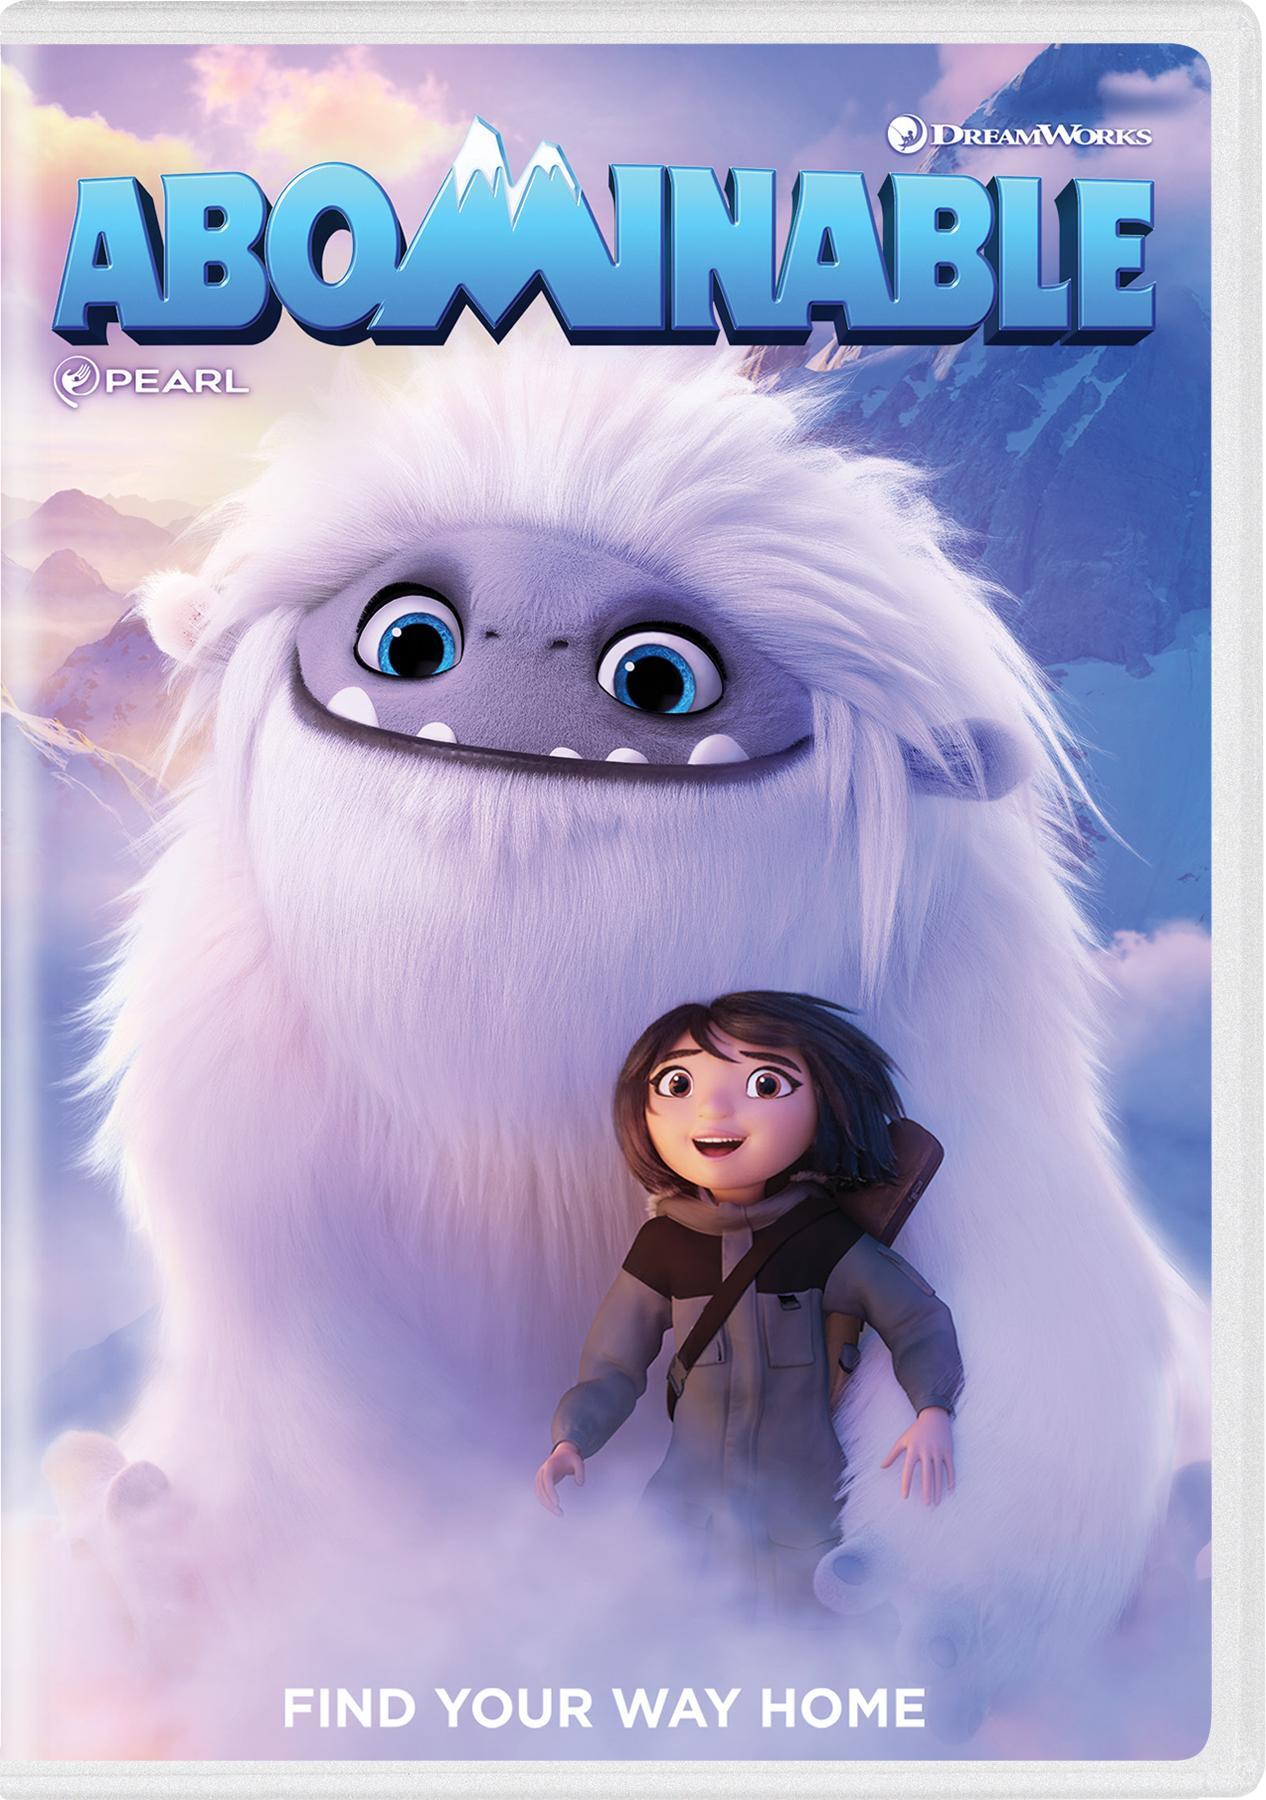 Abominable - DVD [ 2019 ]  - Animation Movies On DVD - Movies On GRUV